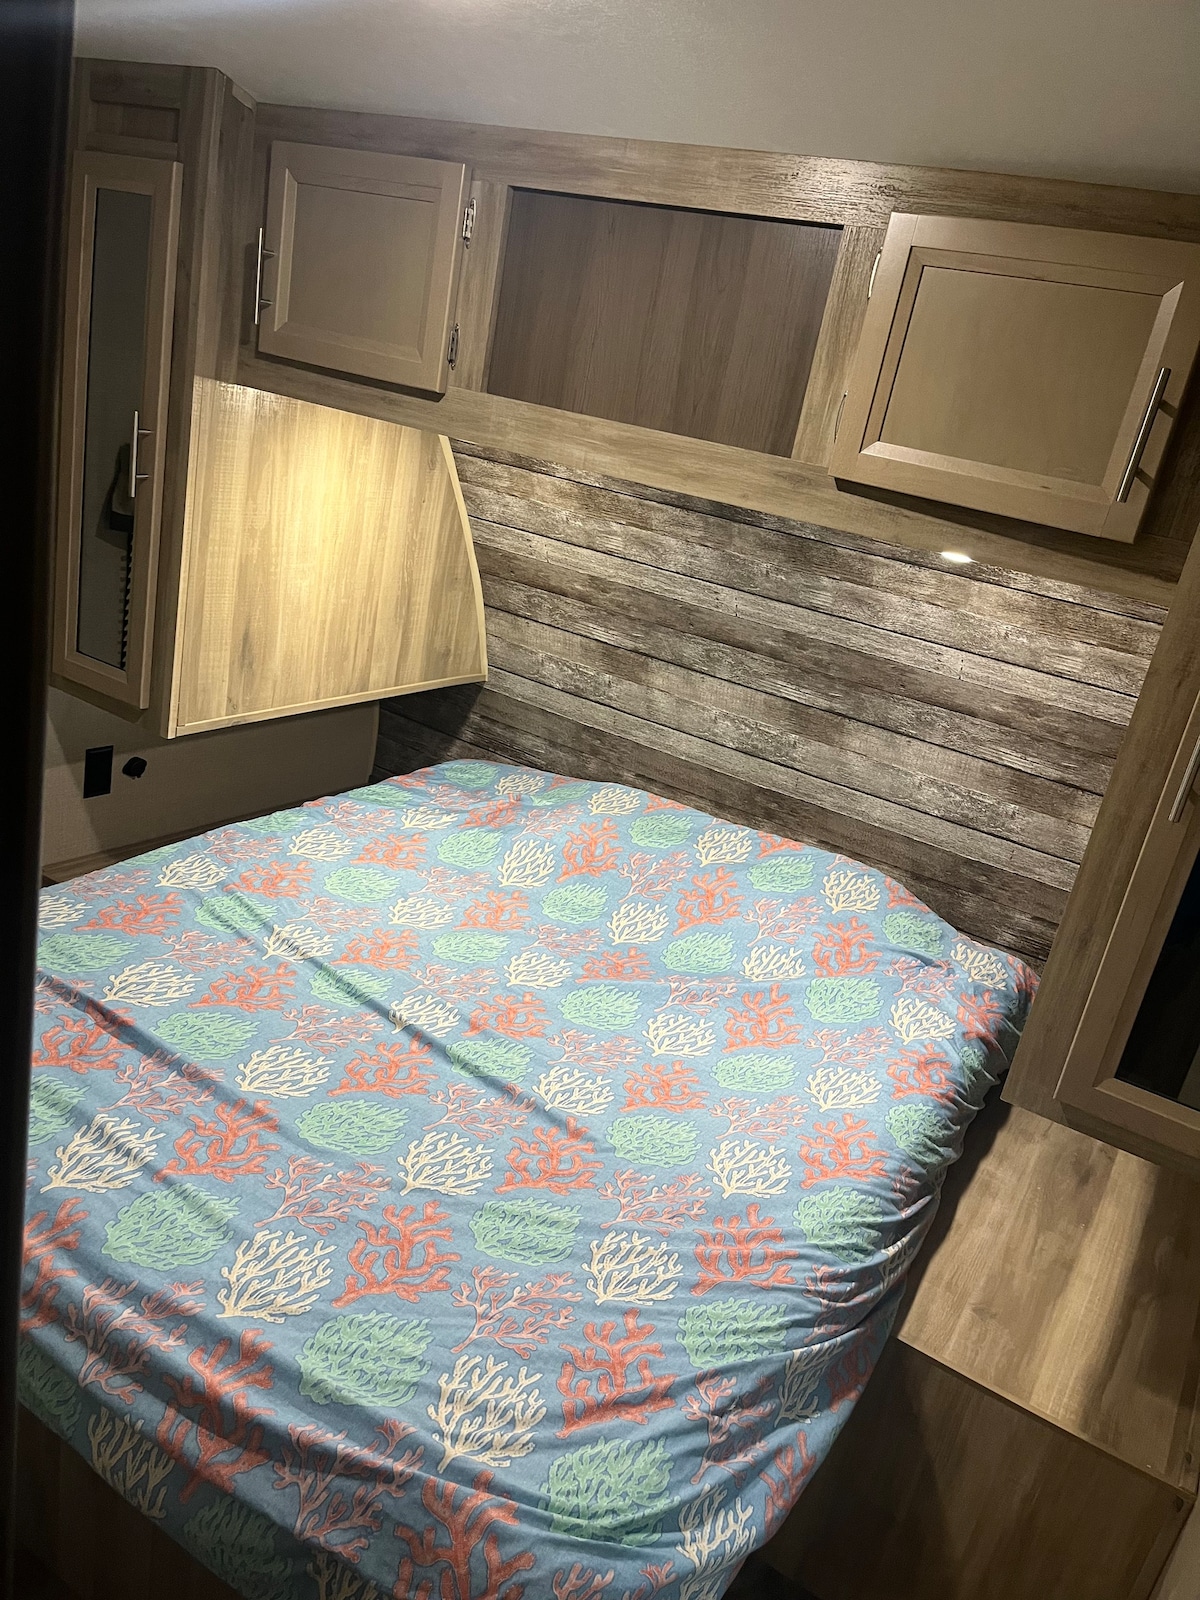 Shannon’s Catalina Legacy camper